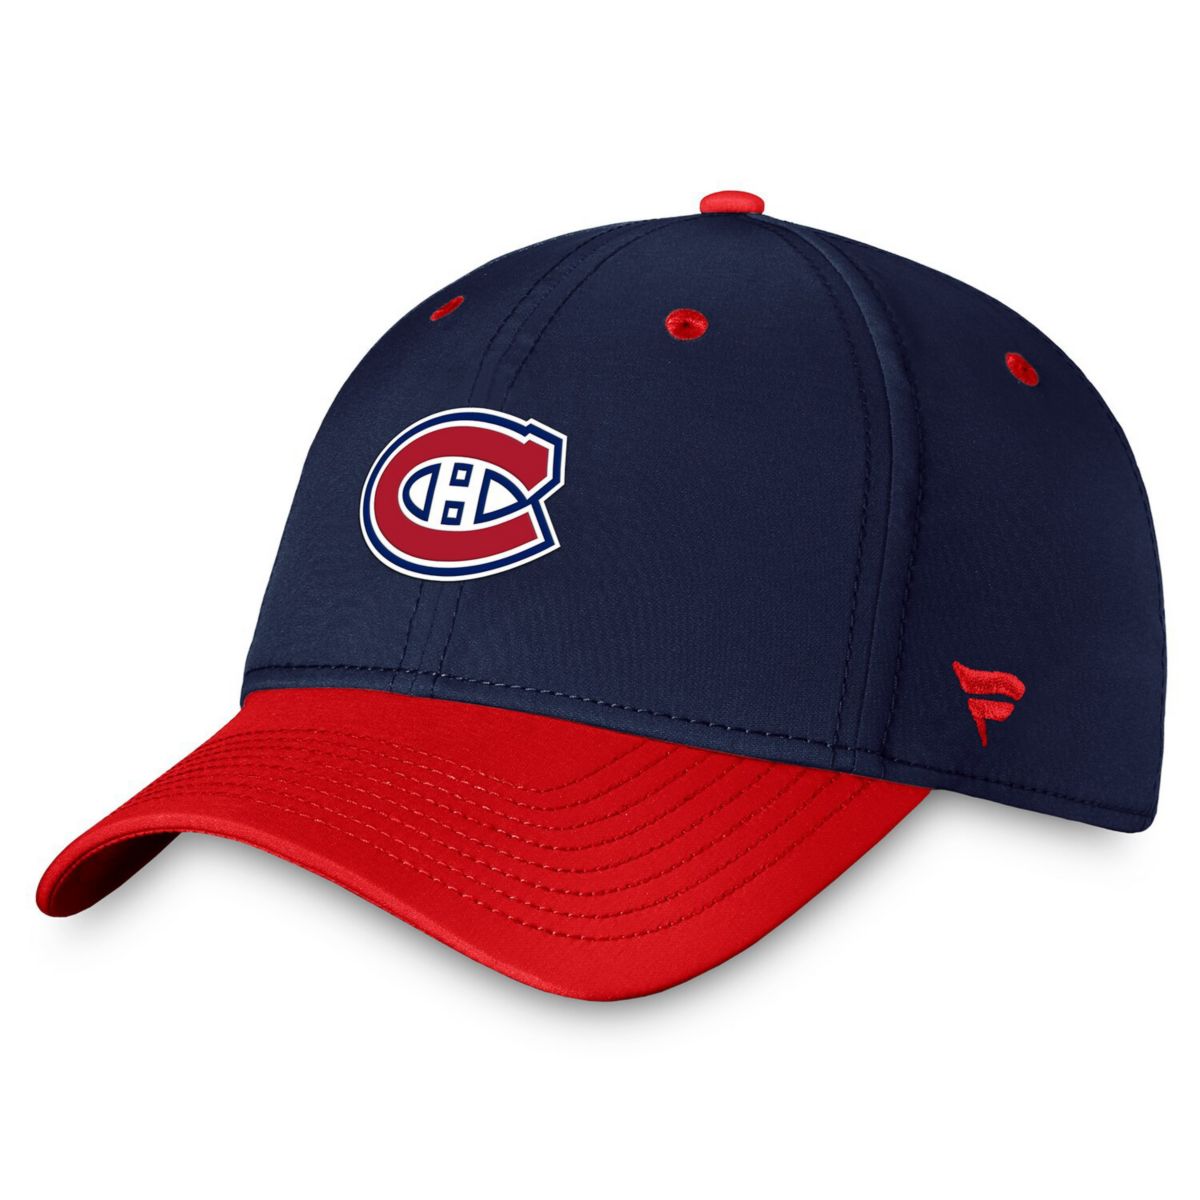 Men's Fanatics Branded  Navy/Red Montreal Canadiens Authentic Pro Rink Two-Tone Flex Hat Fanatics